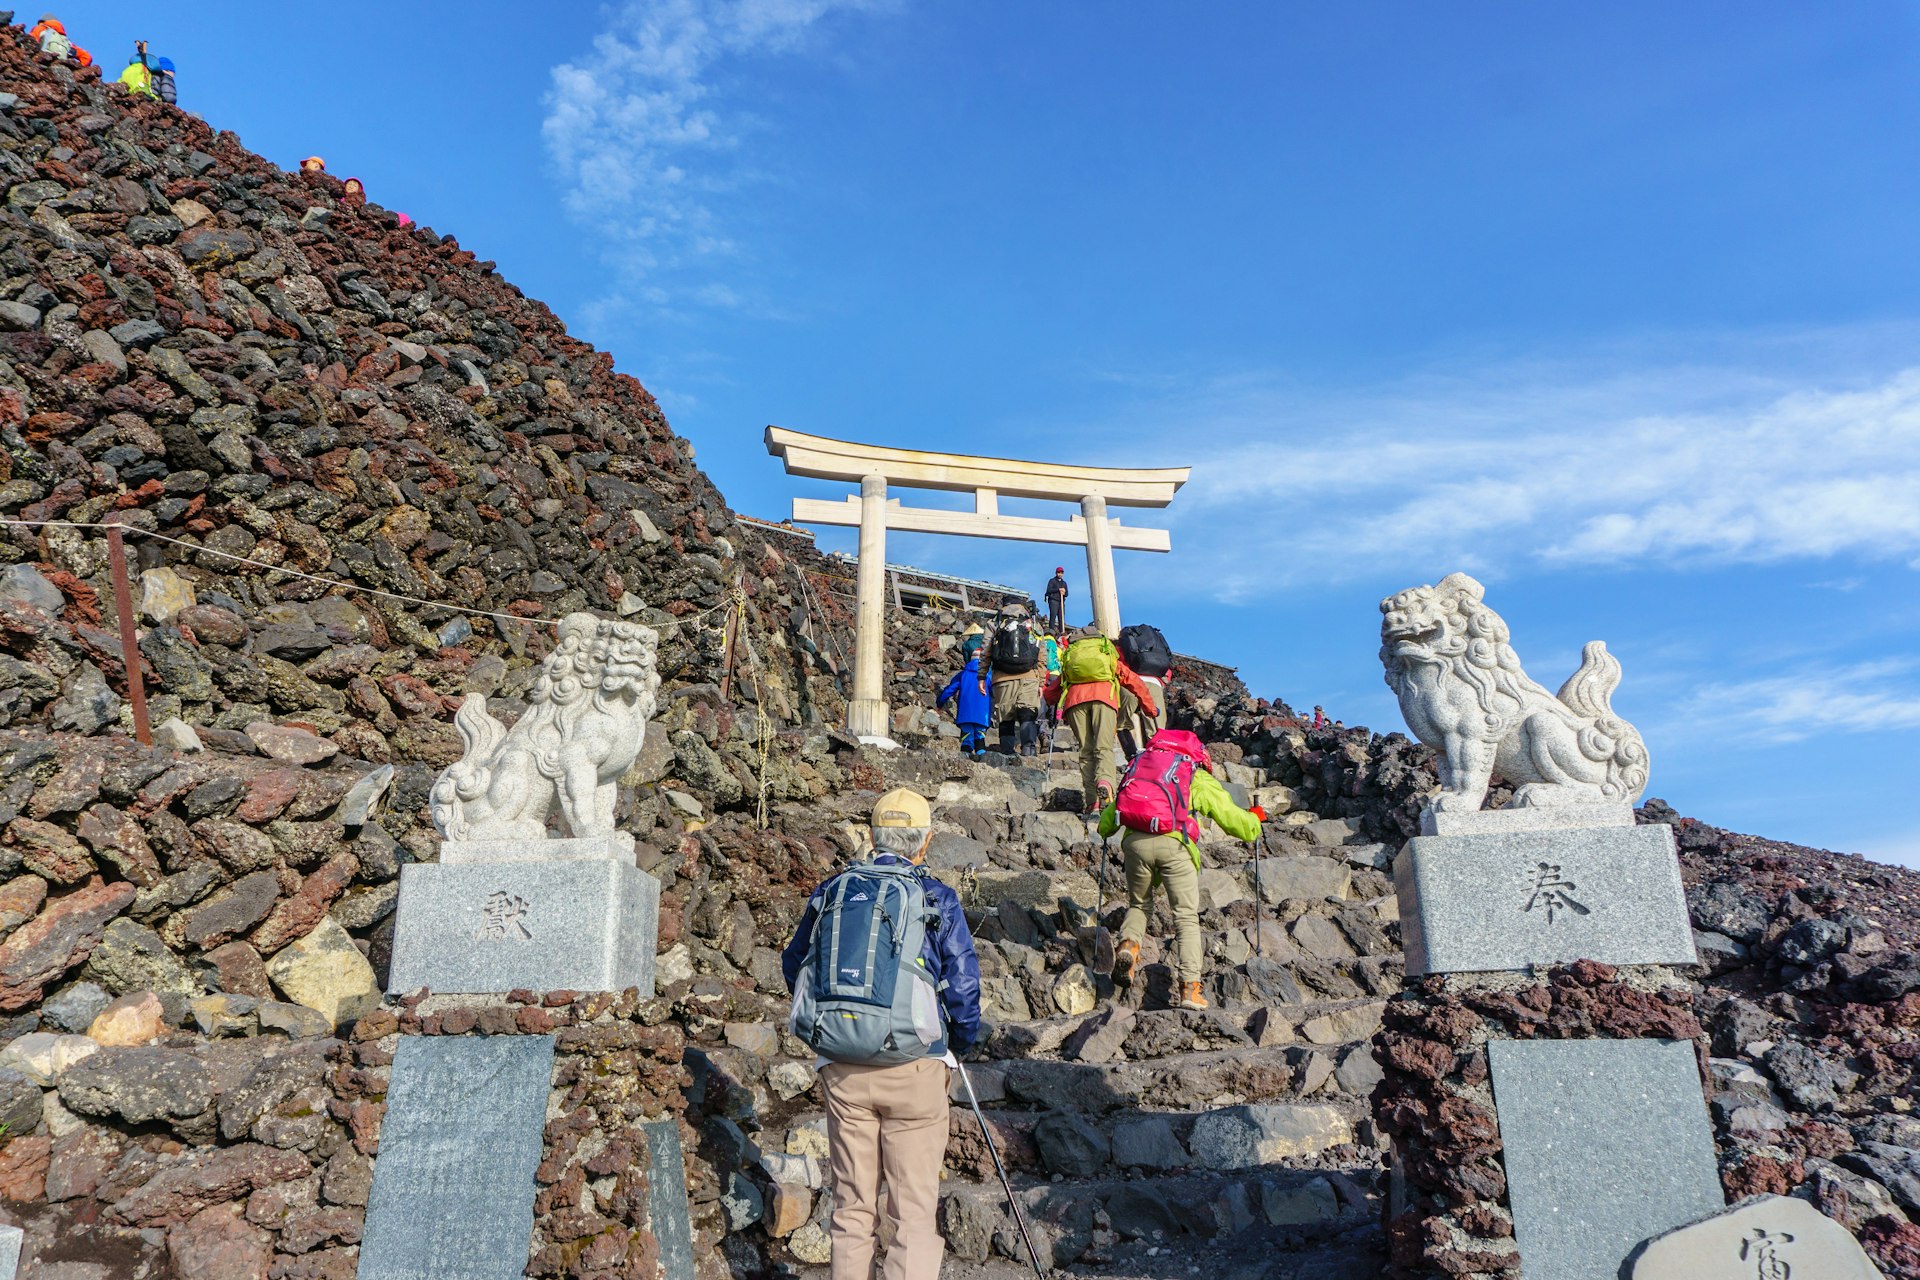 A group of hikers head up a steep series of steps with a torii gate ahead of them